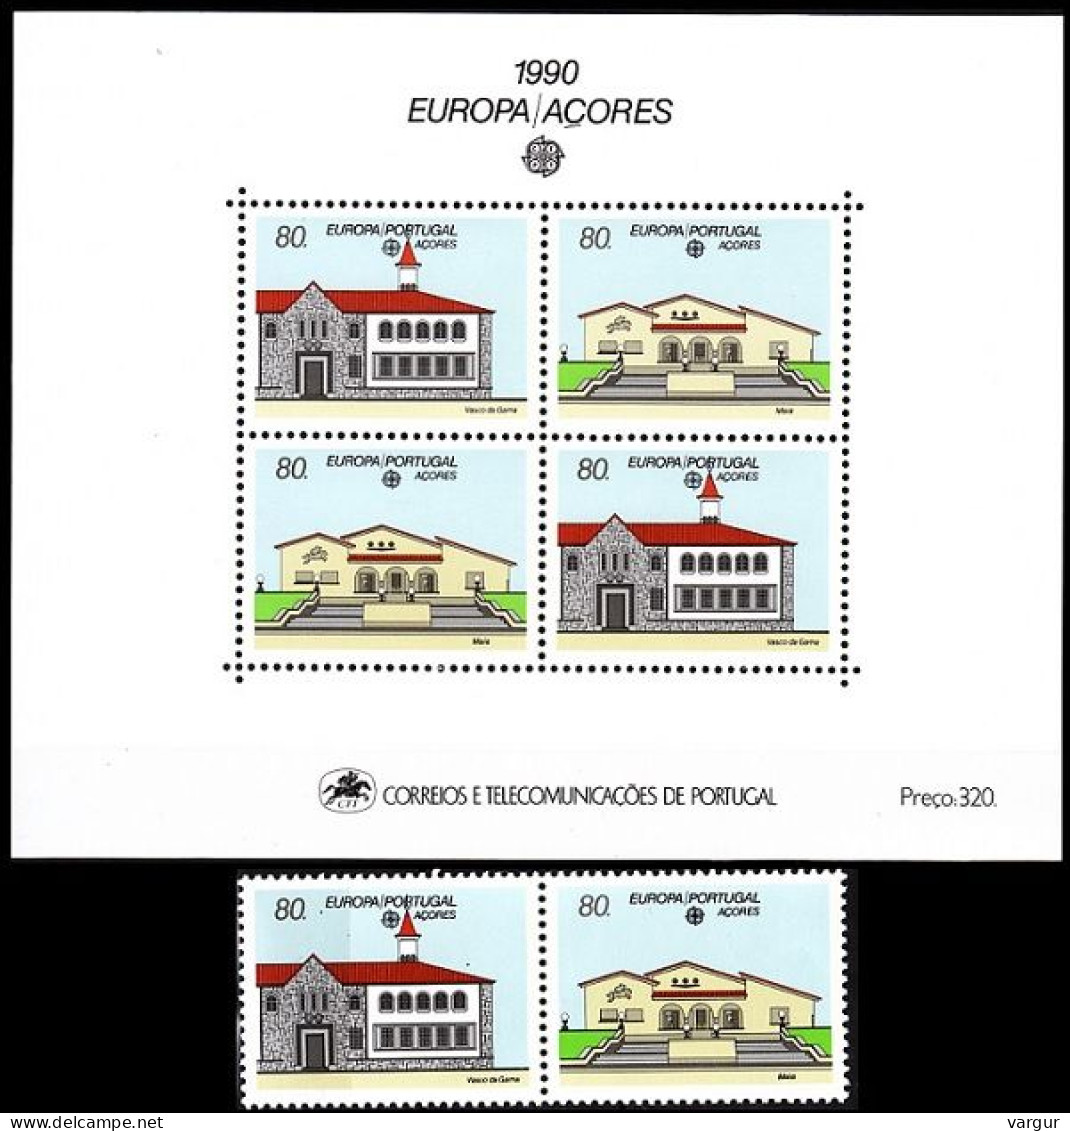 ACORES 1990 EUROPA: Post Offices, Architecture. Pair + S/sheet, MNH - 1990